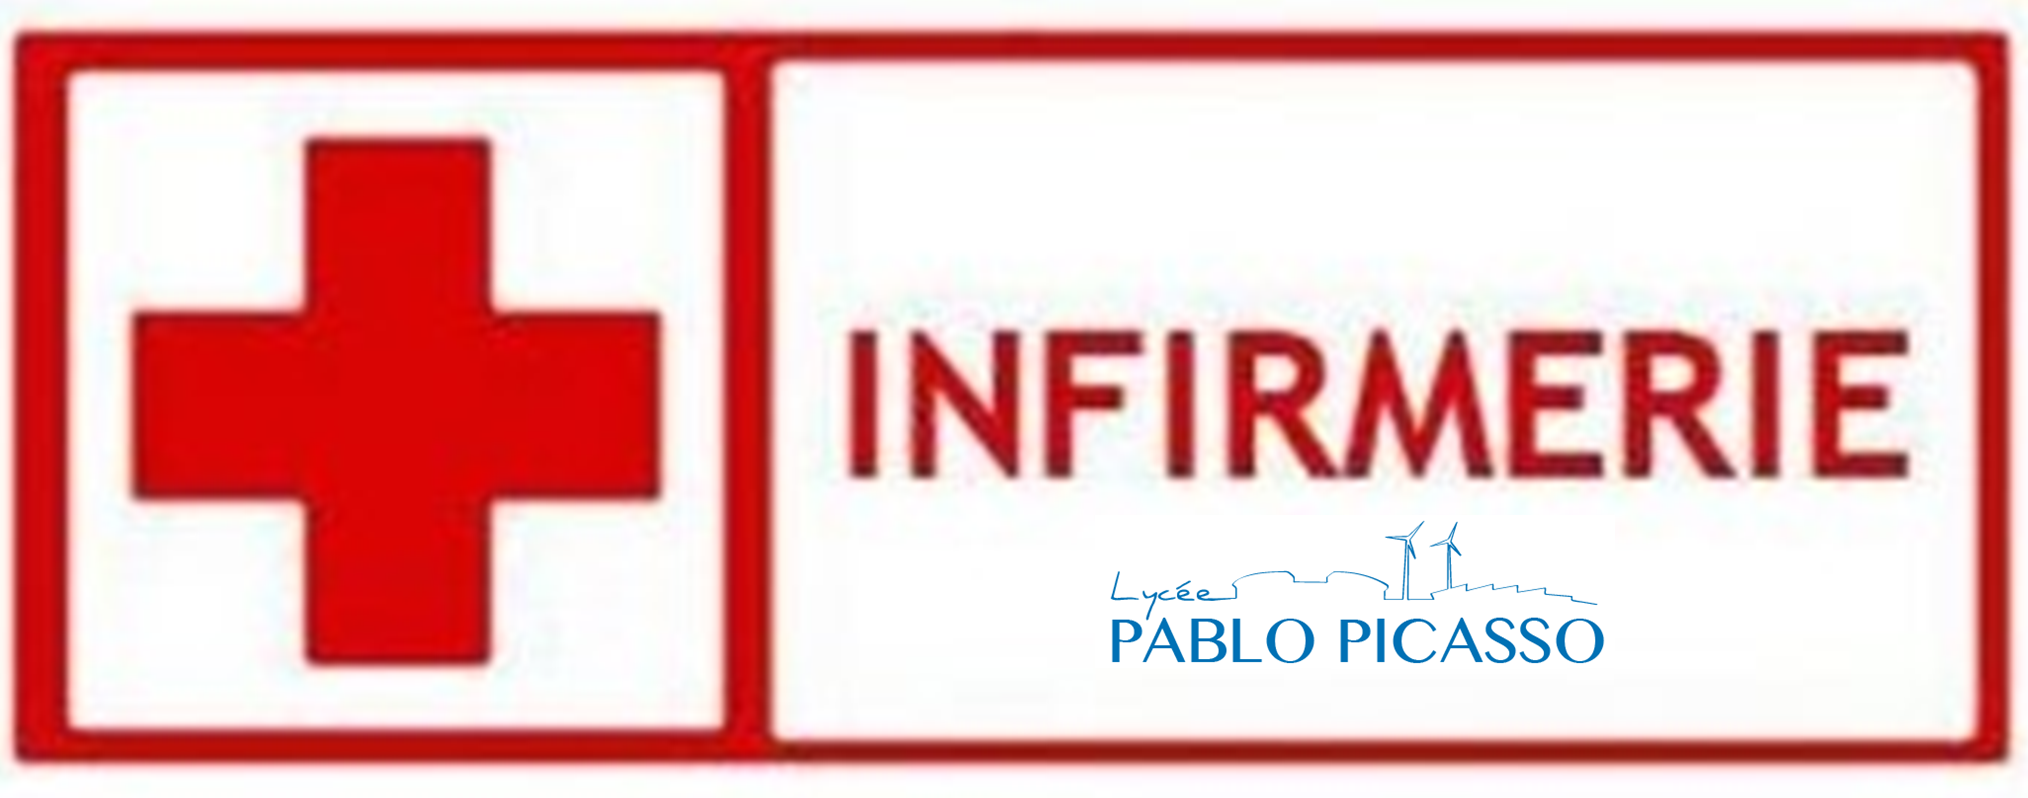 LOGO INFIRMERIE PABLO PICASSO.png